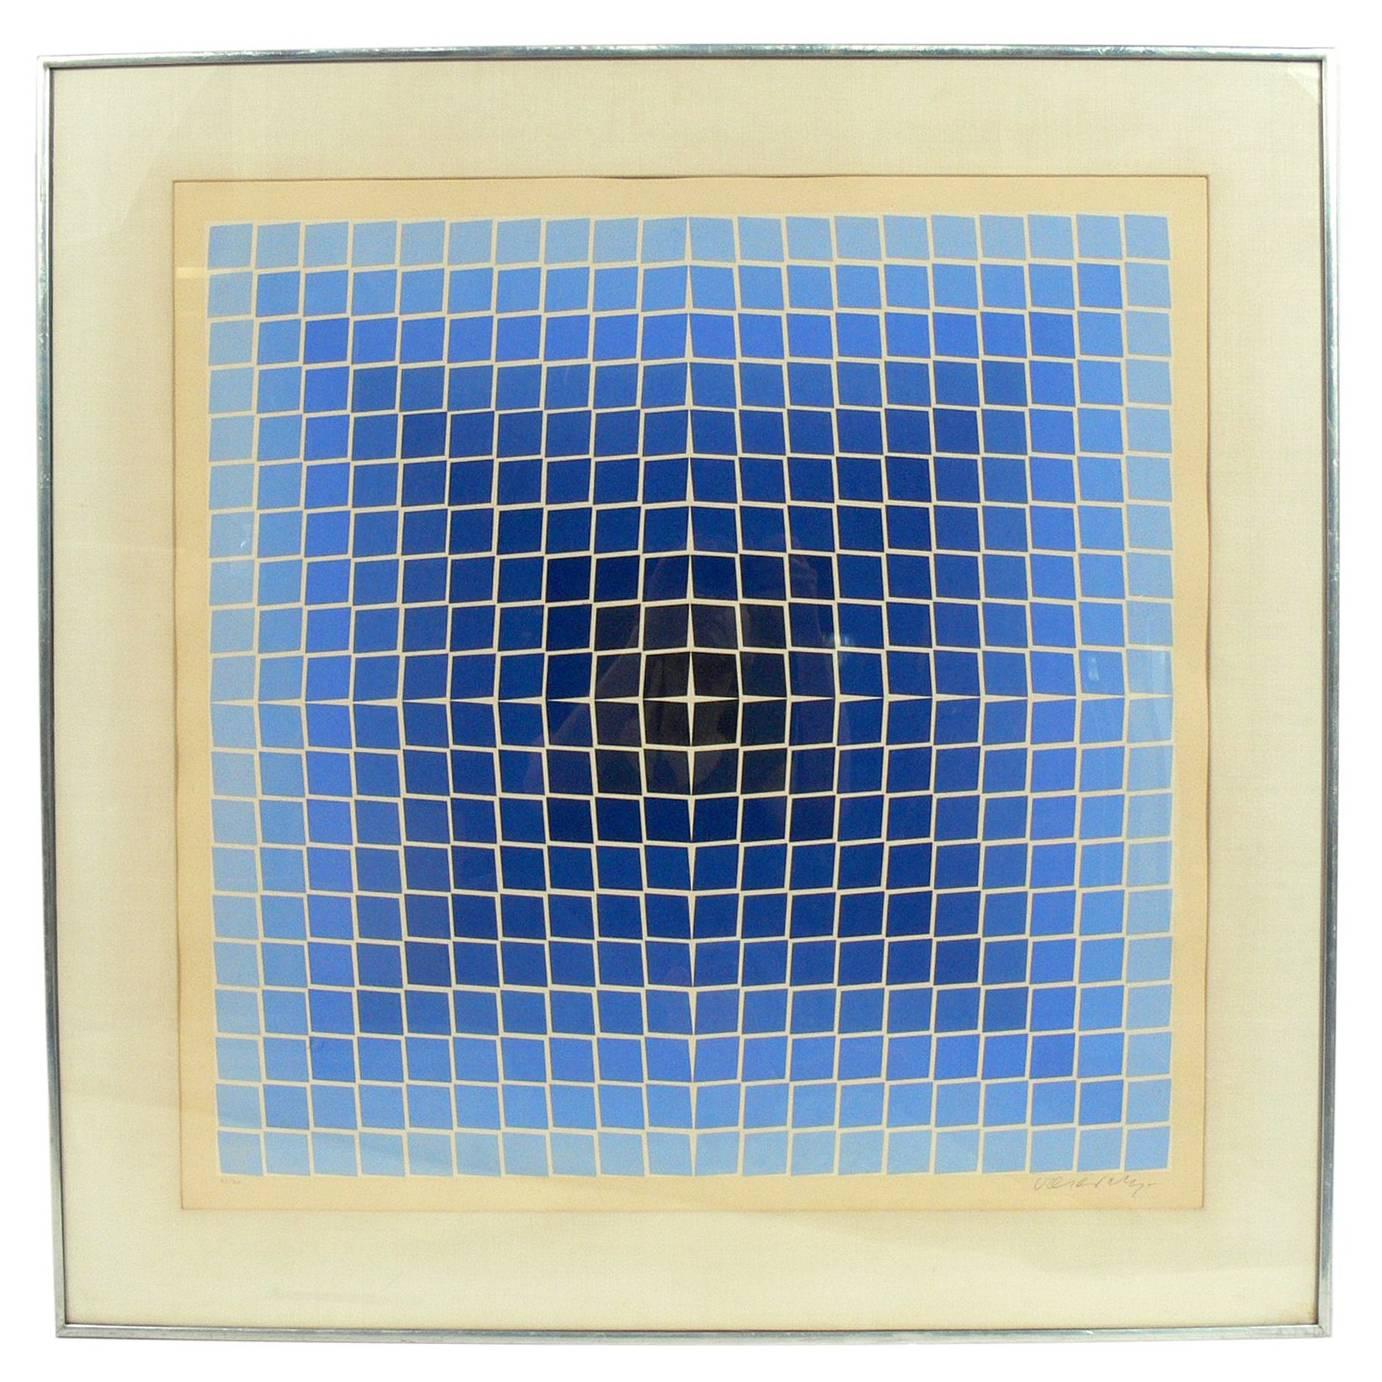 Colorful Geometric Lithograph by Victor Vasarely Signed and Numbered